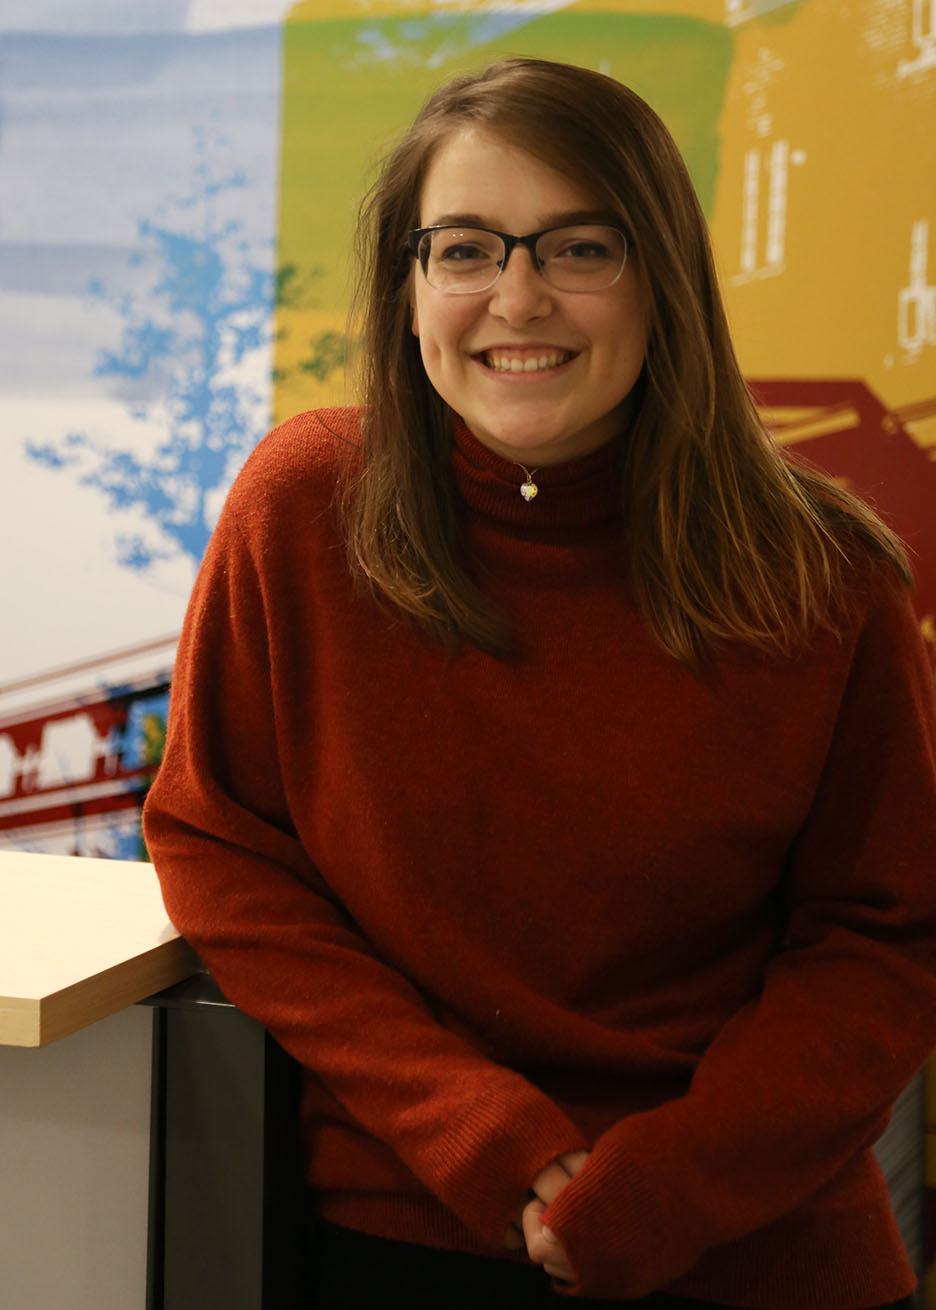 Alex Connor in a read sweater with glasses pictured at the Iowa State Daily